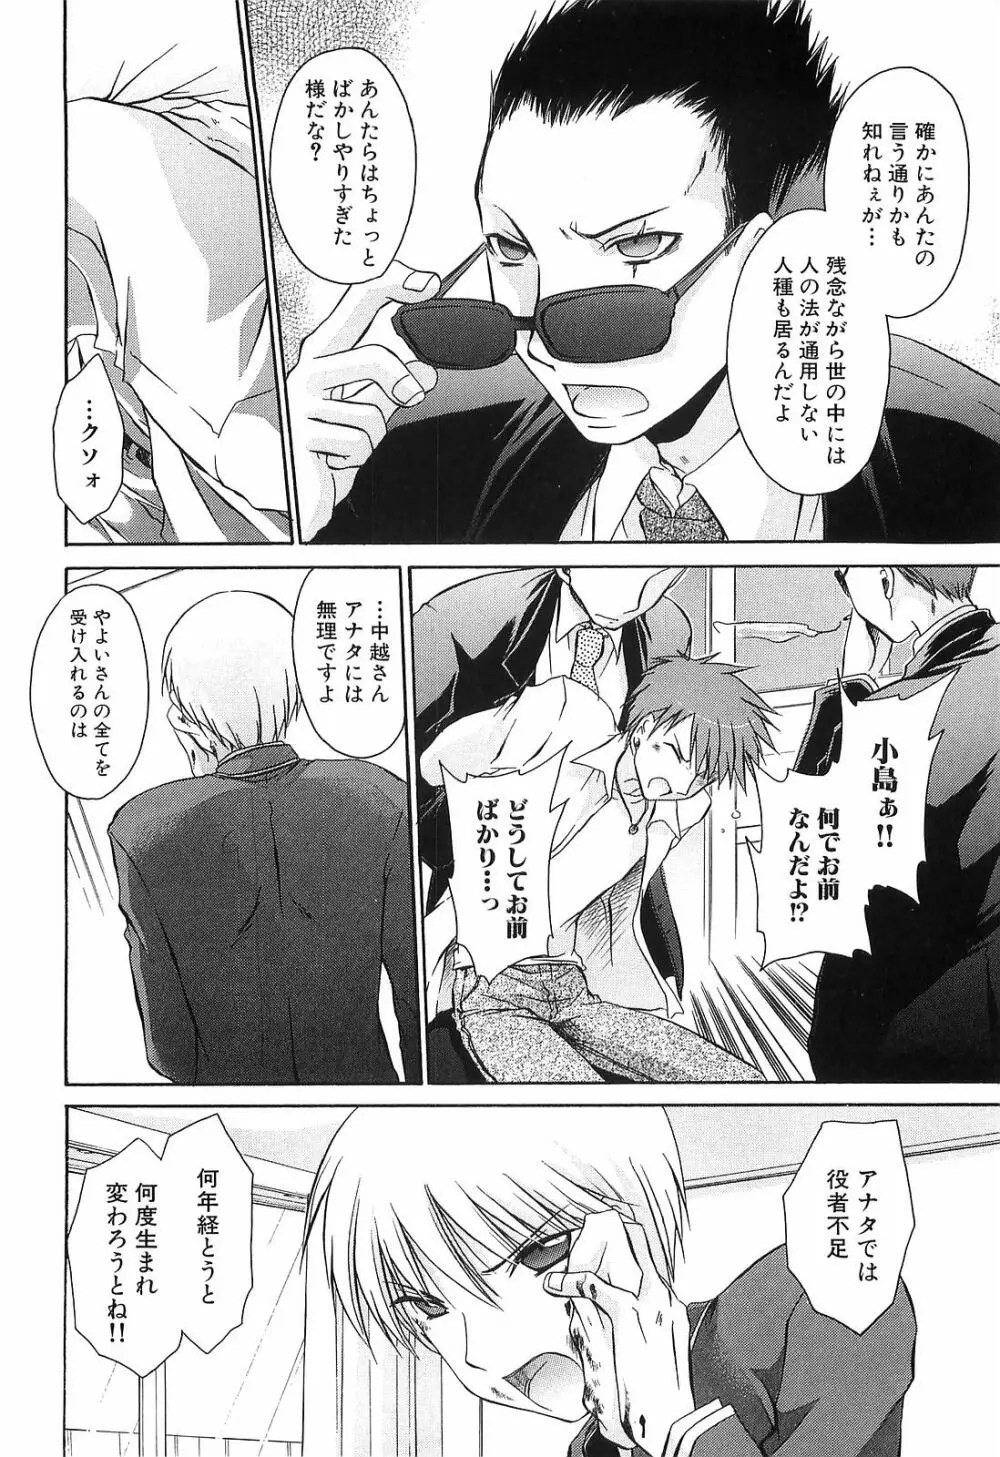 LOVE & HATE 3 FINAL～ENGAGE～通常版 Page.89